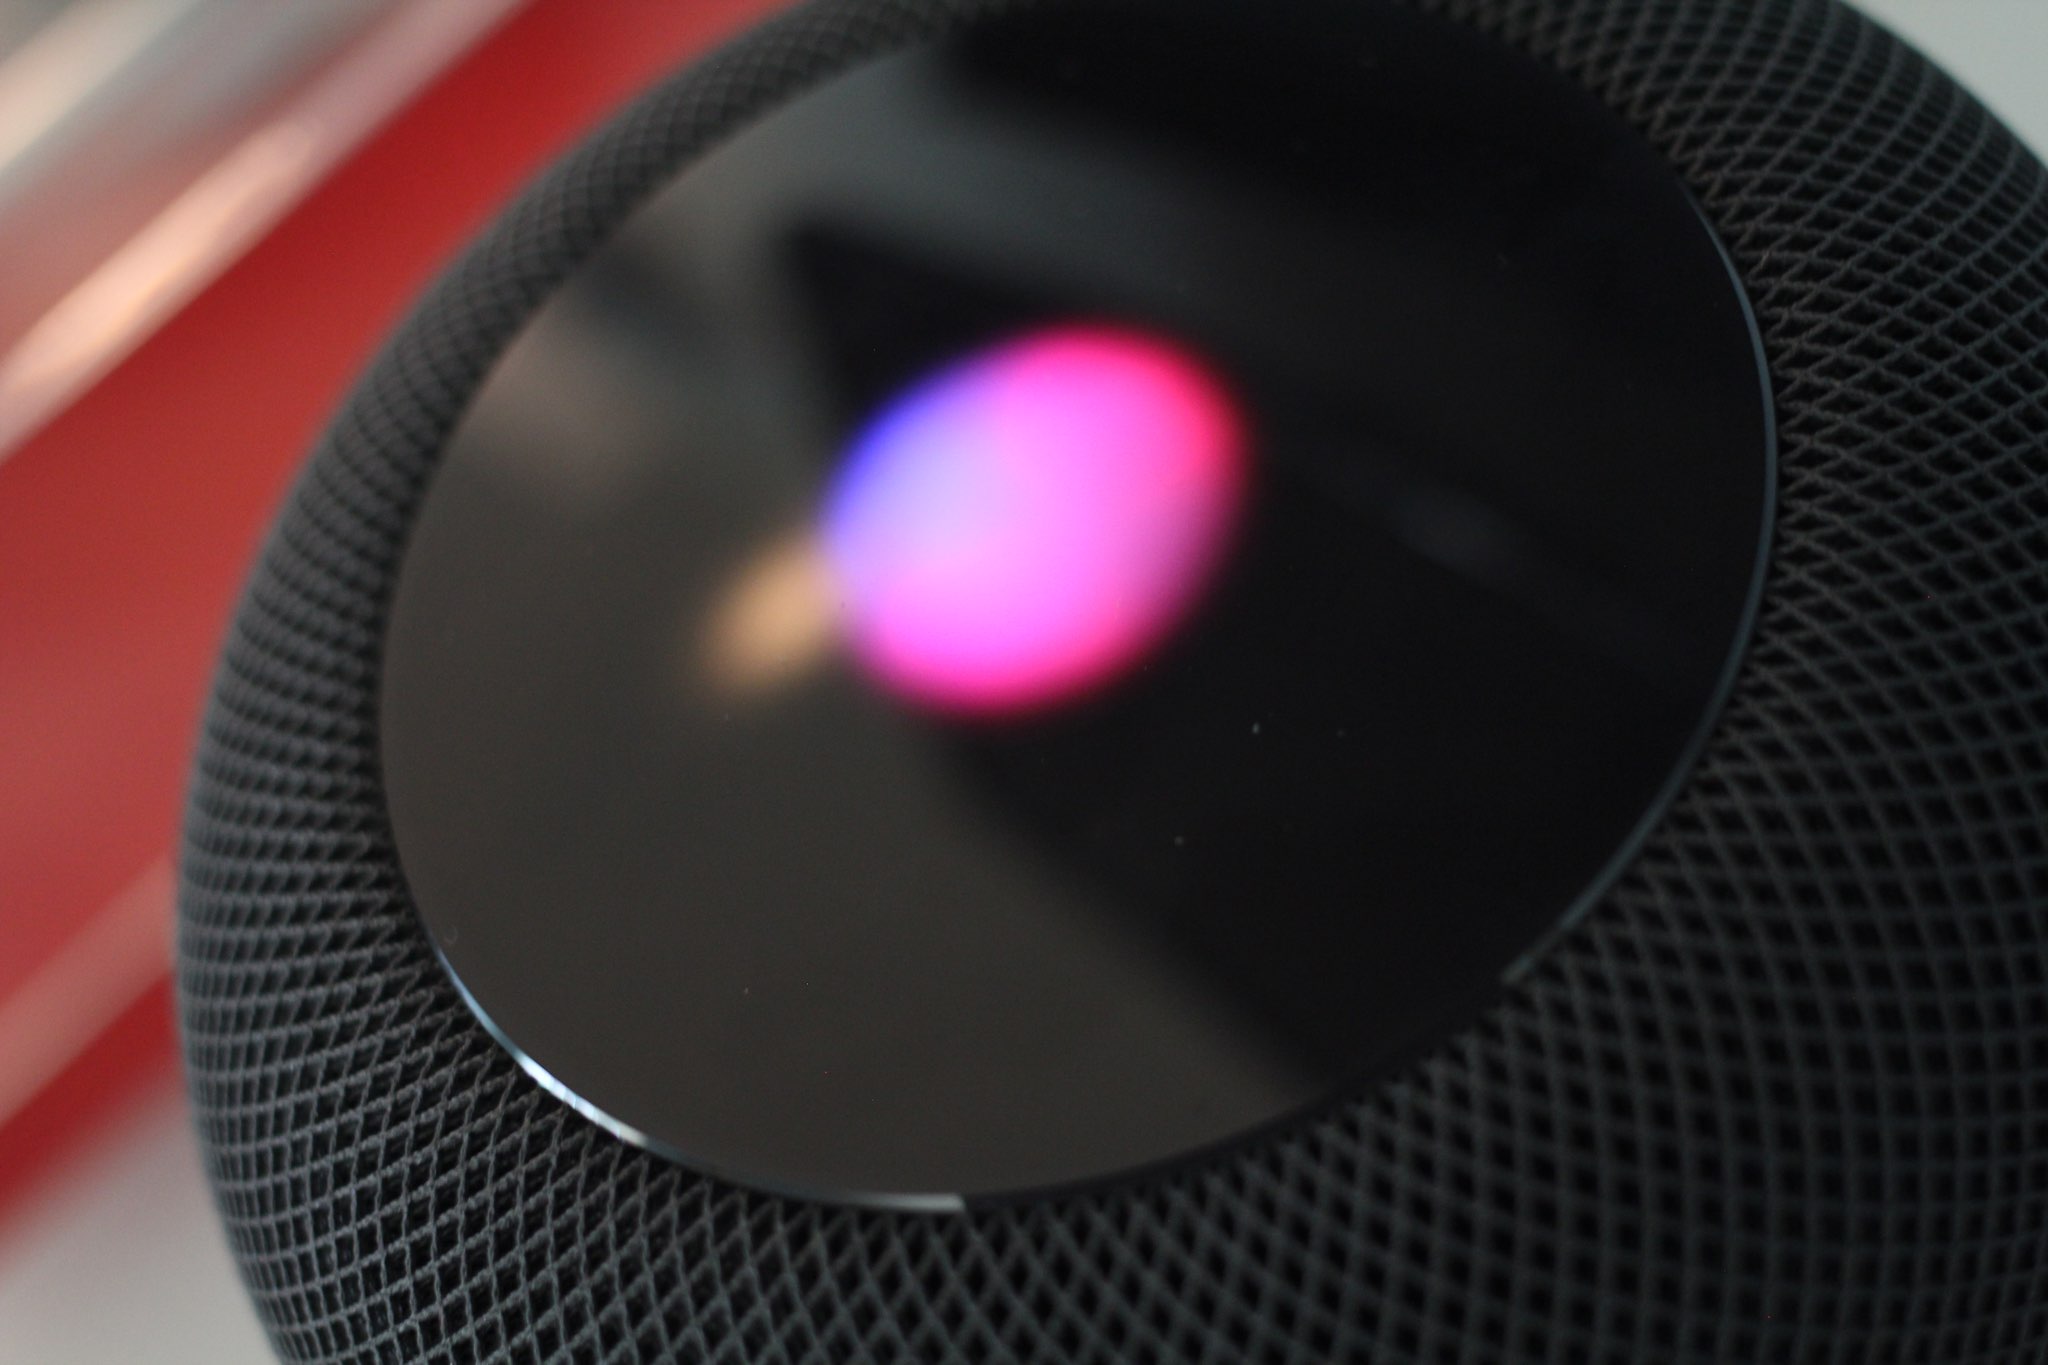 HomePod with pink Siri light on